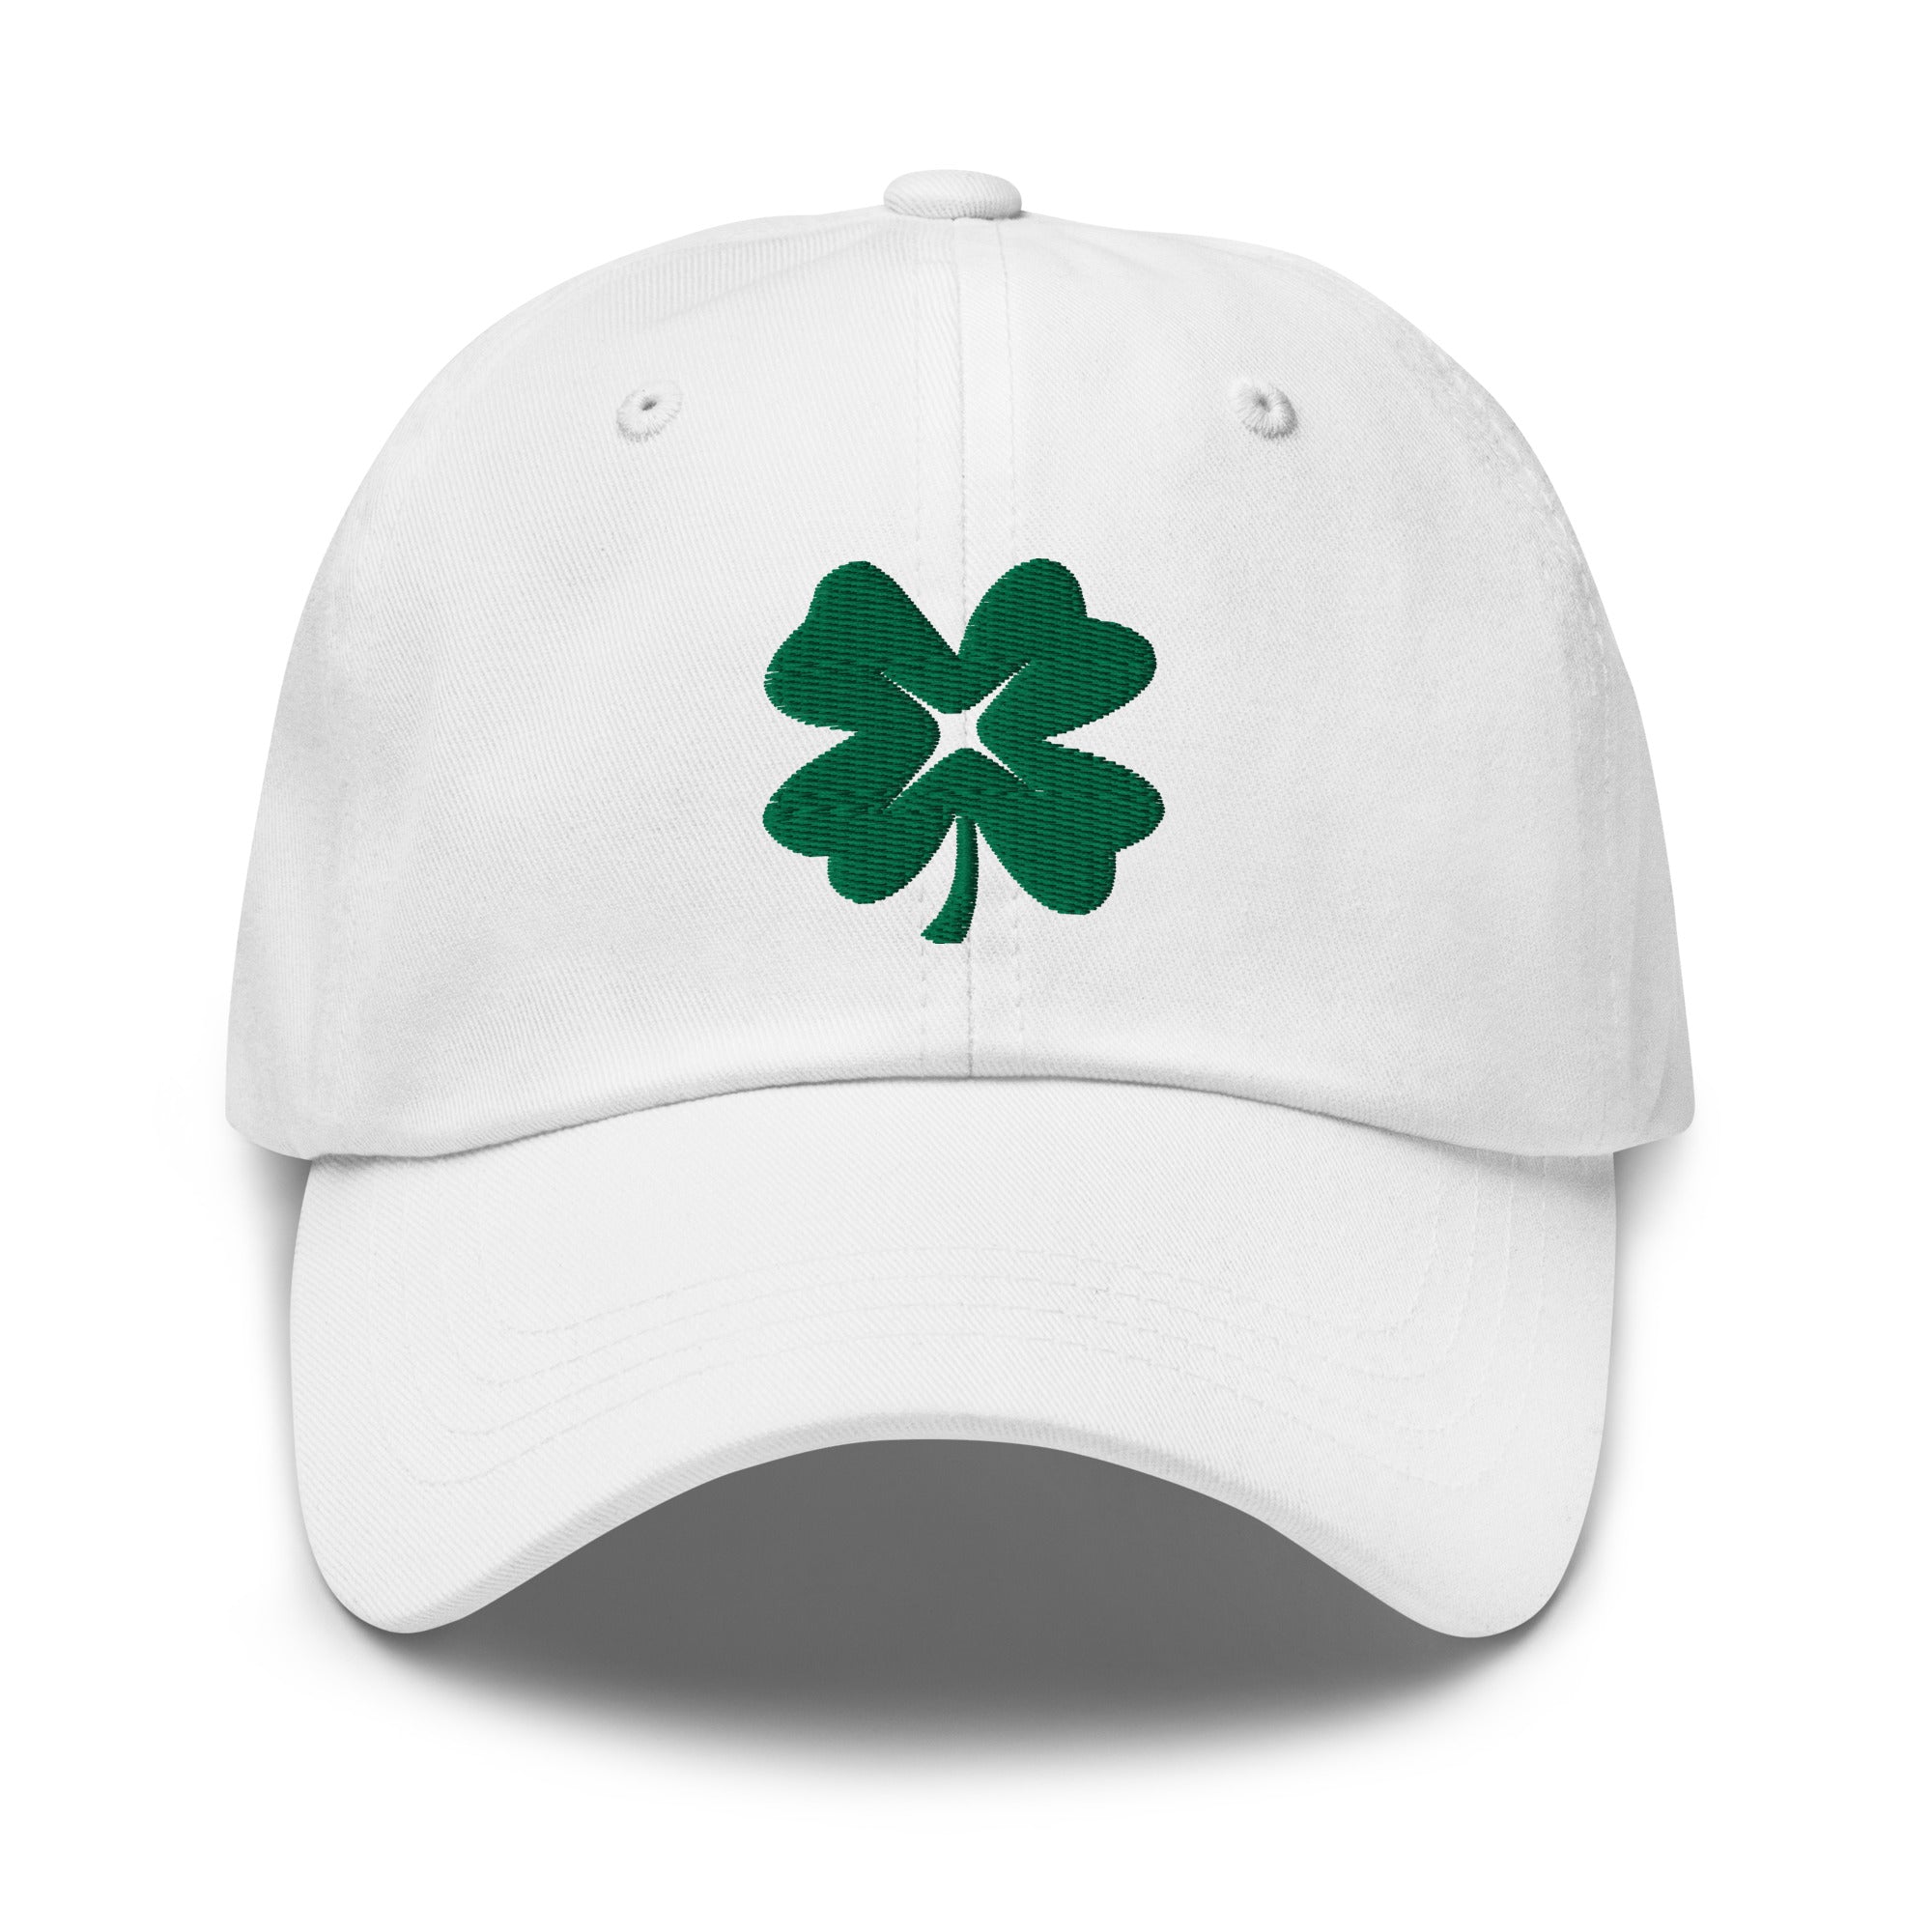 Rugby Imports Springfield Celts Adjustable Hat